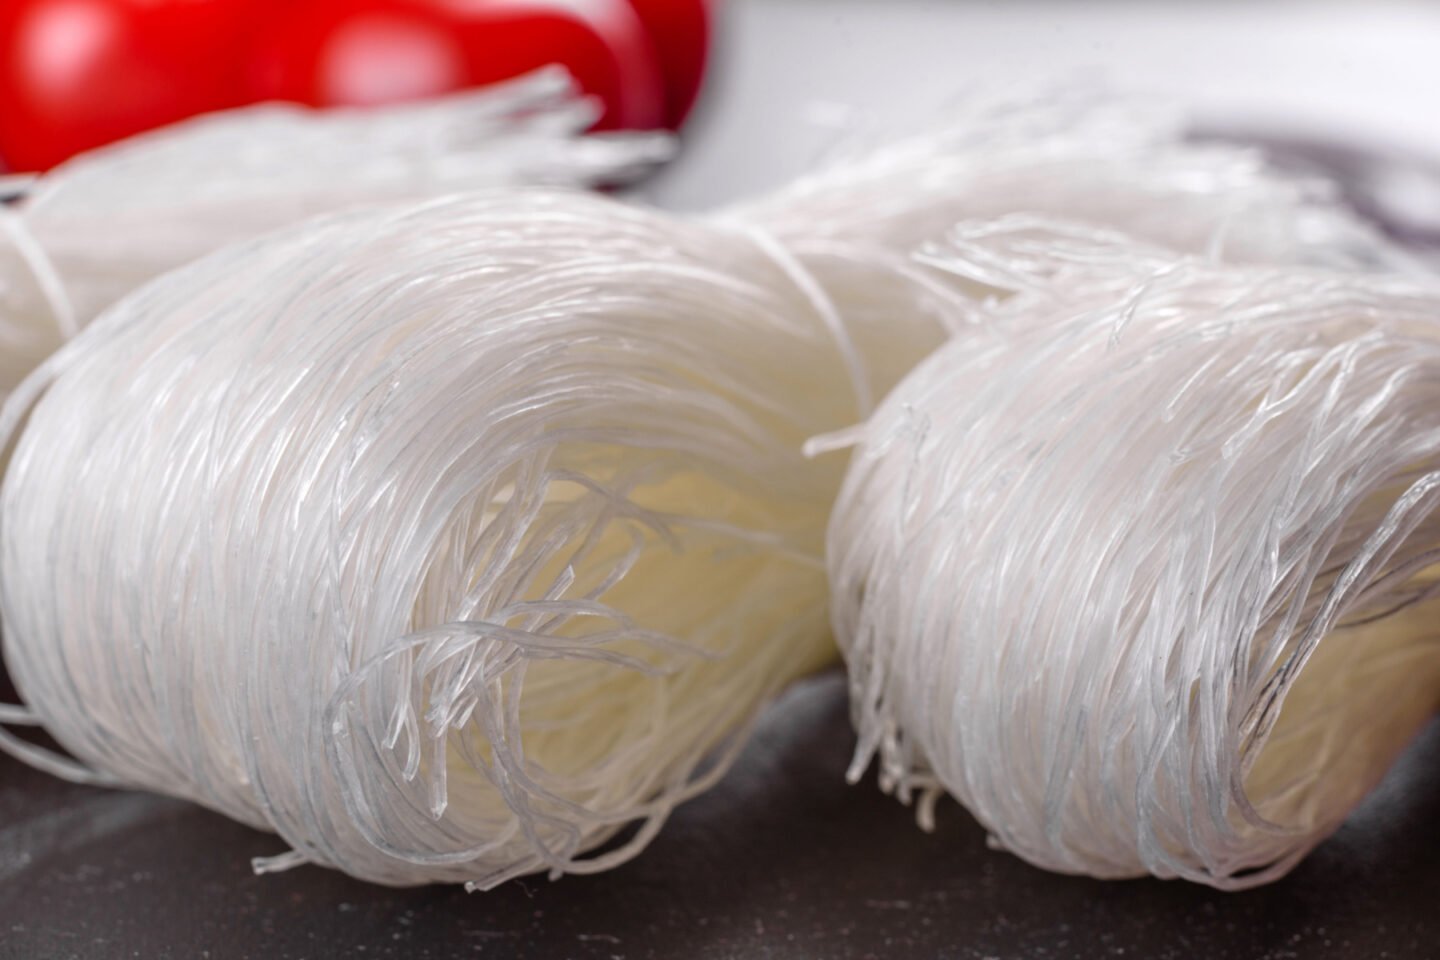 rice vermicelli glass noodles